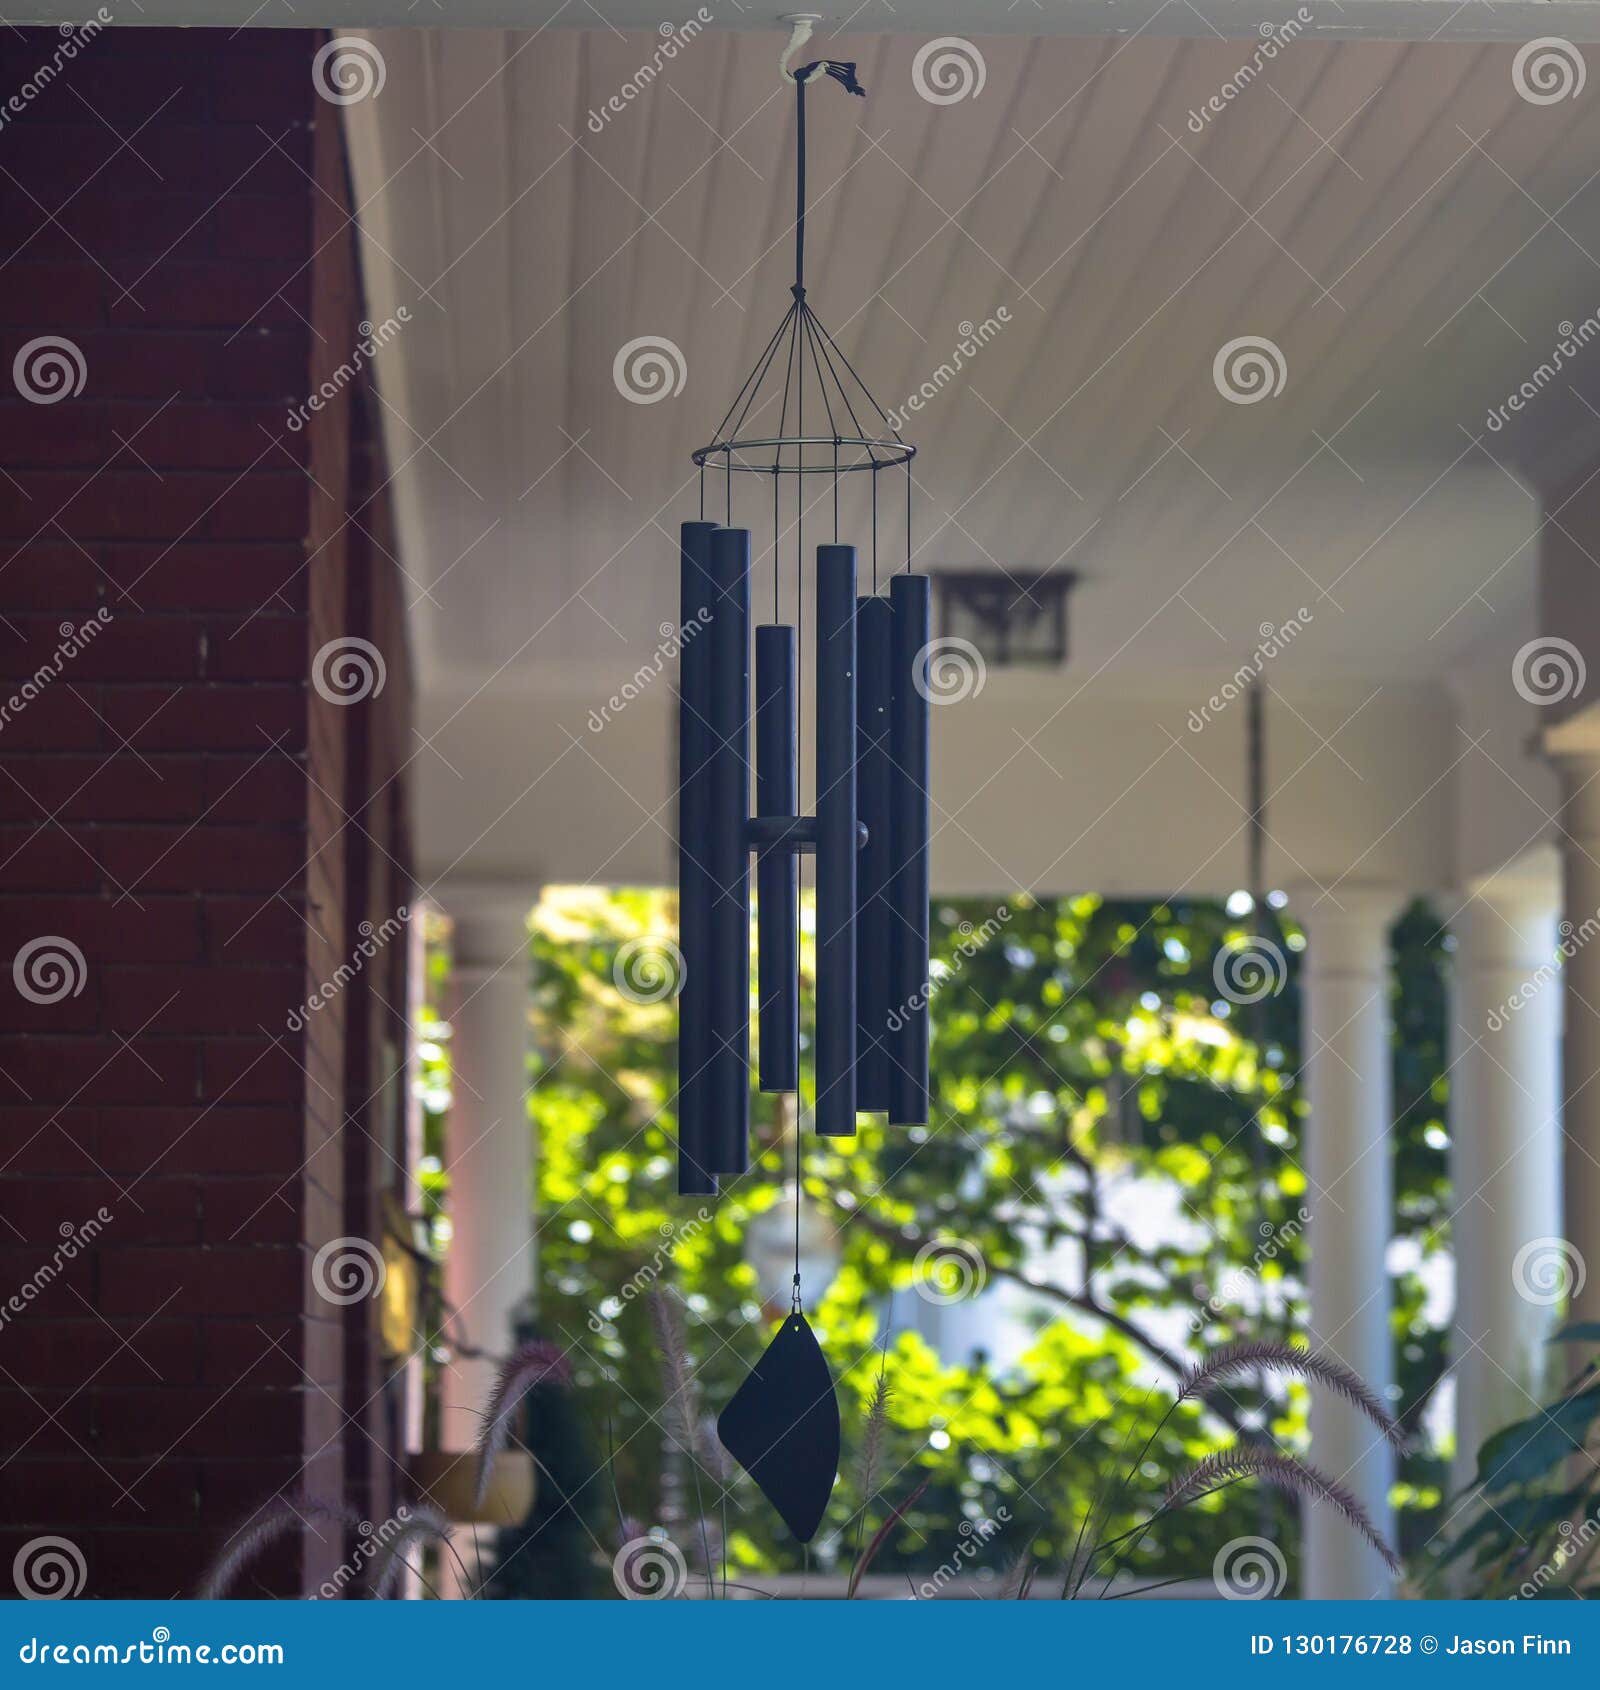 How to Hang Wind Chimes on Brick Wall 